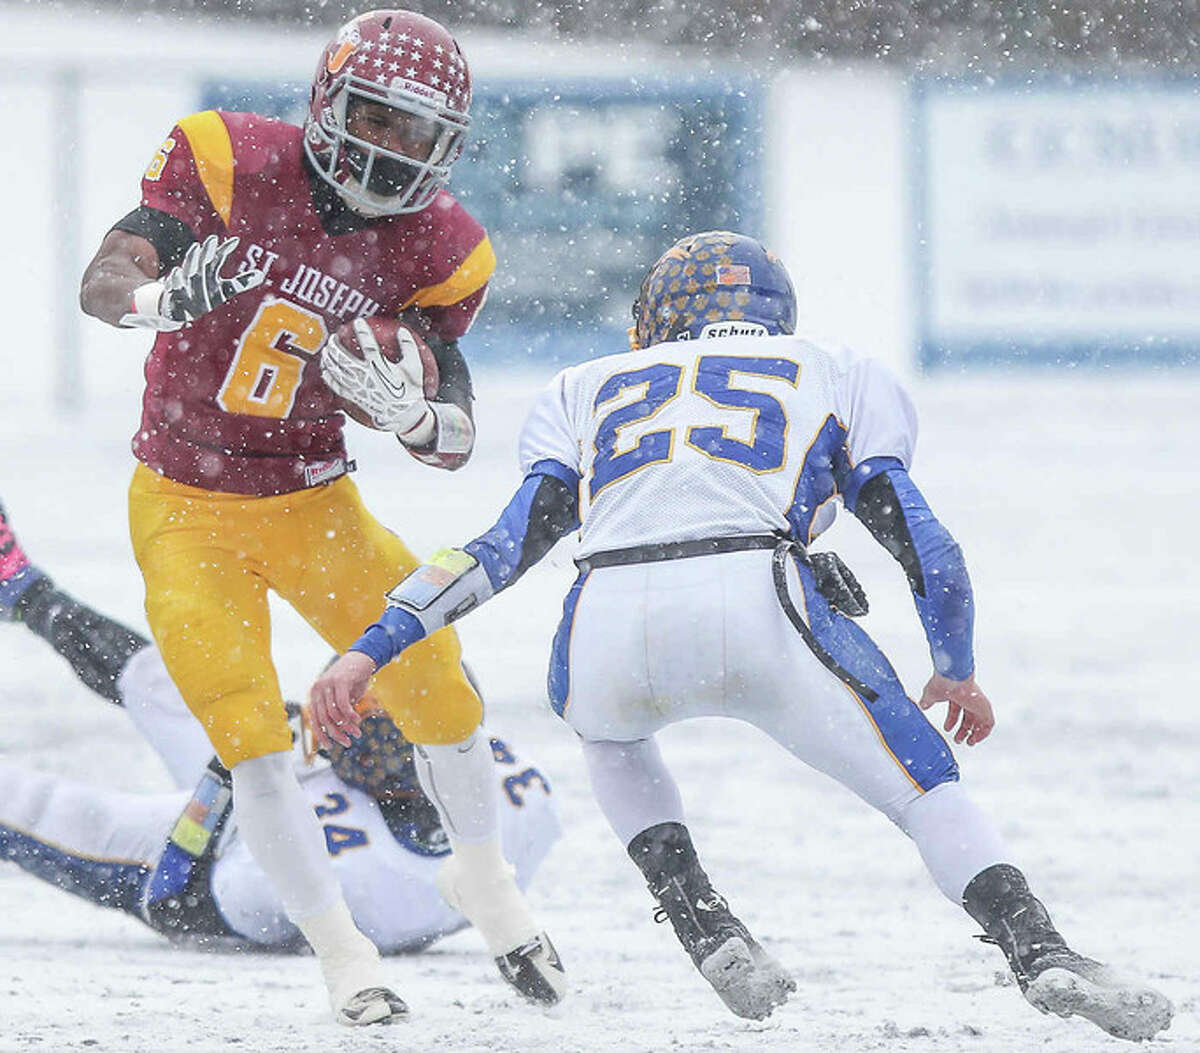 St Joseph’s running back Mufasha Abdul-Basir gains large yardage during the Cadets 54-16 state championship win over Brookfield at CCSU’s Arute field on Dec. 14. The threat of inclement weather for games played deep into December is one of the reasons the CIAC believes the high school football playoff system should change. (Photo John Vanacore)